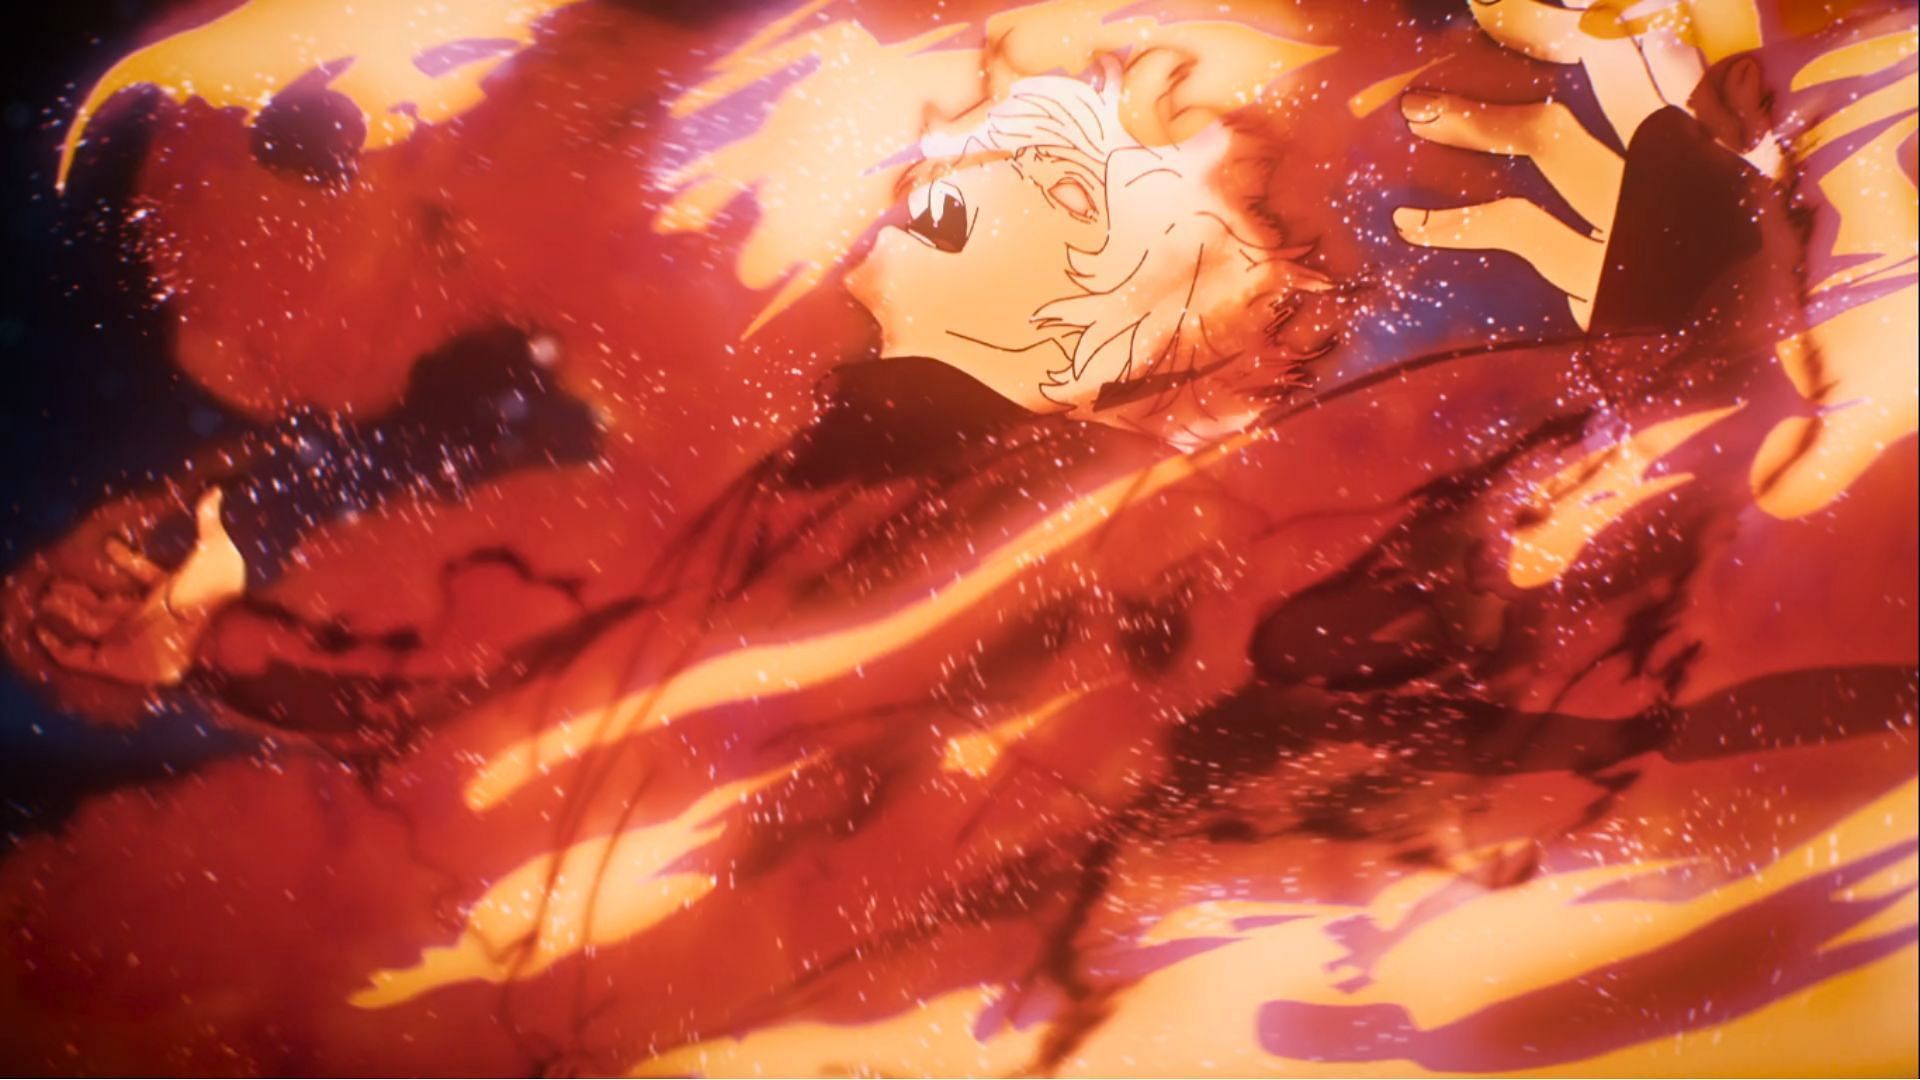 Gabimaru using his Ninpo: Ascetic Blaze as seen in the opening of Hell